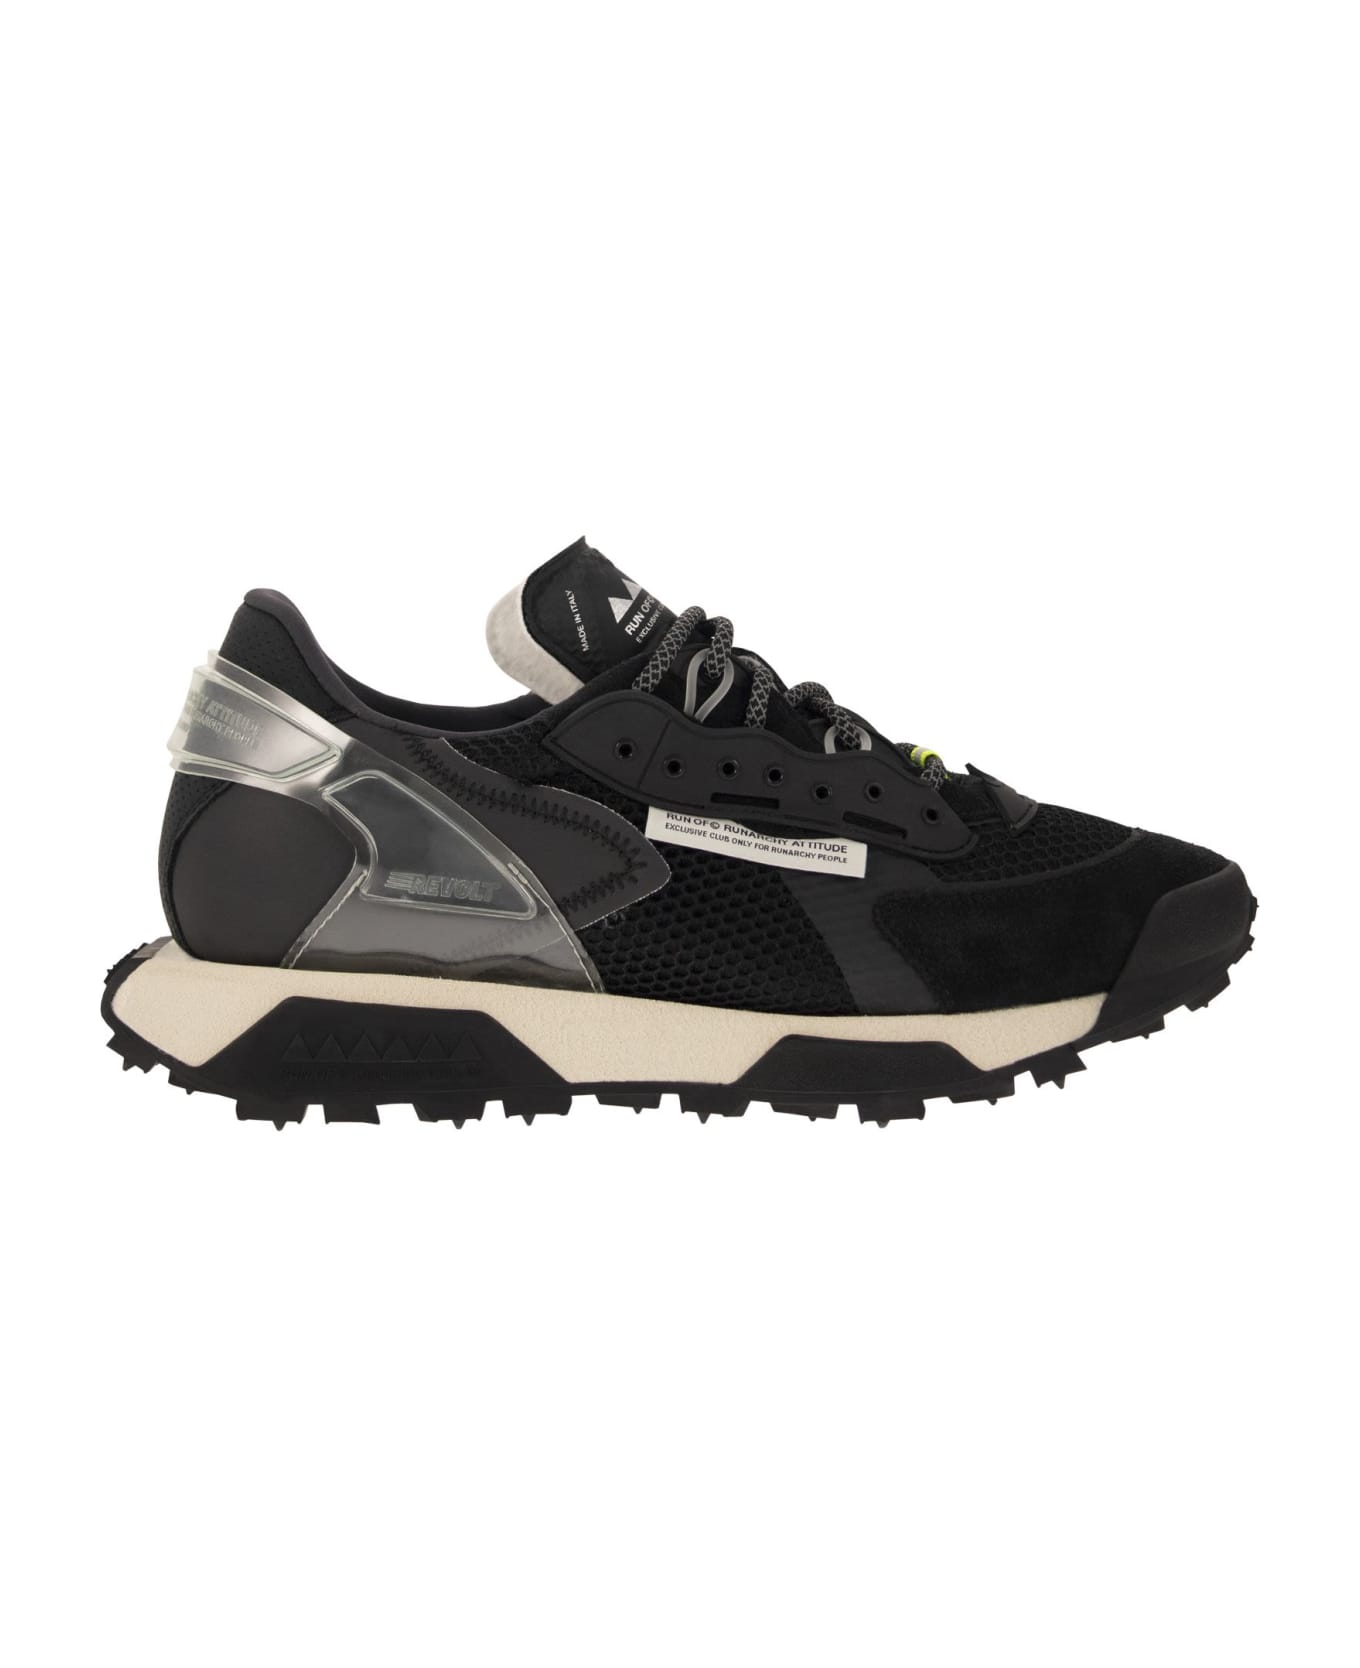 RUN OF Revolt - Leather And Fabric Trainers - Black